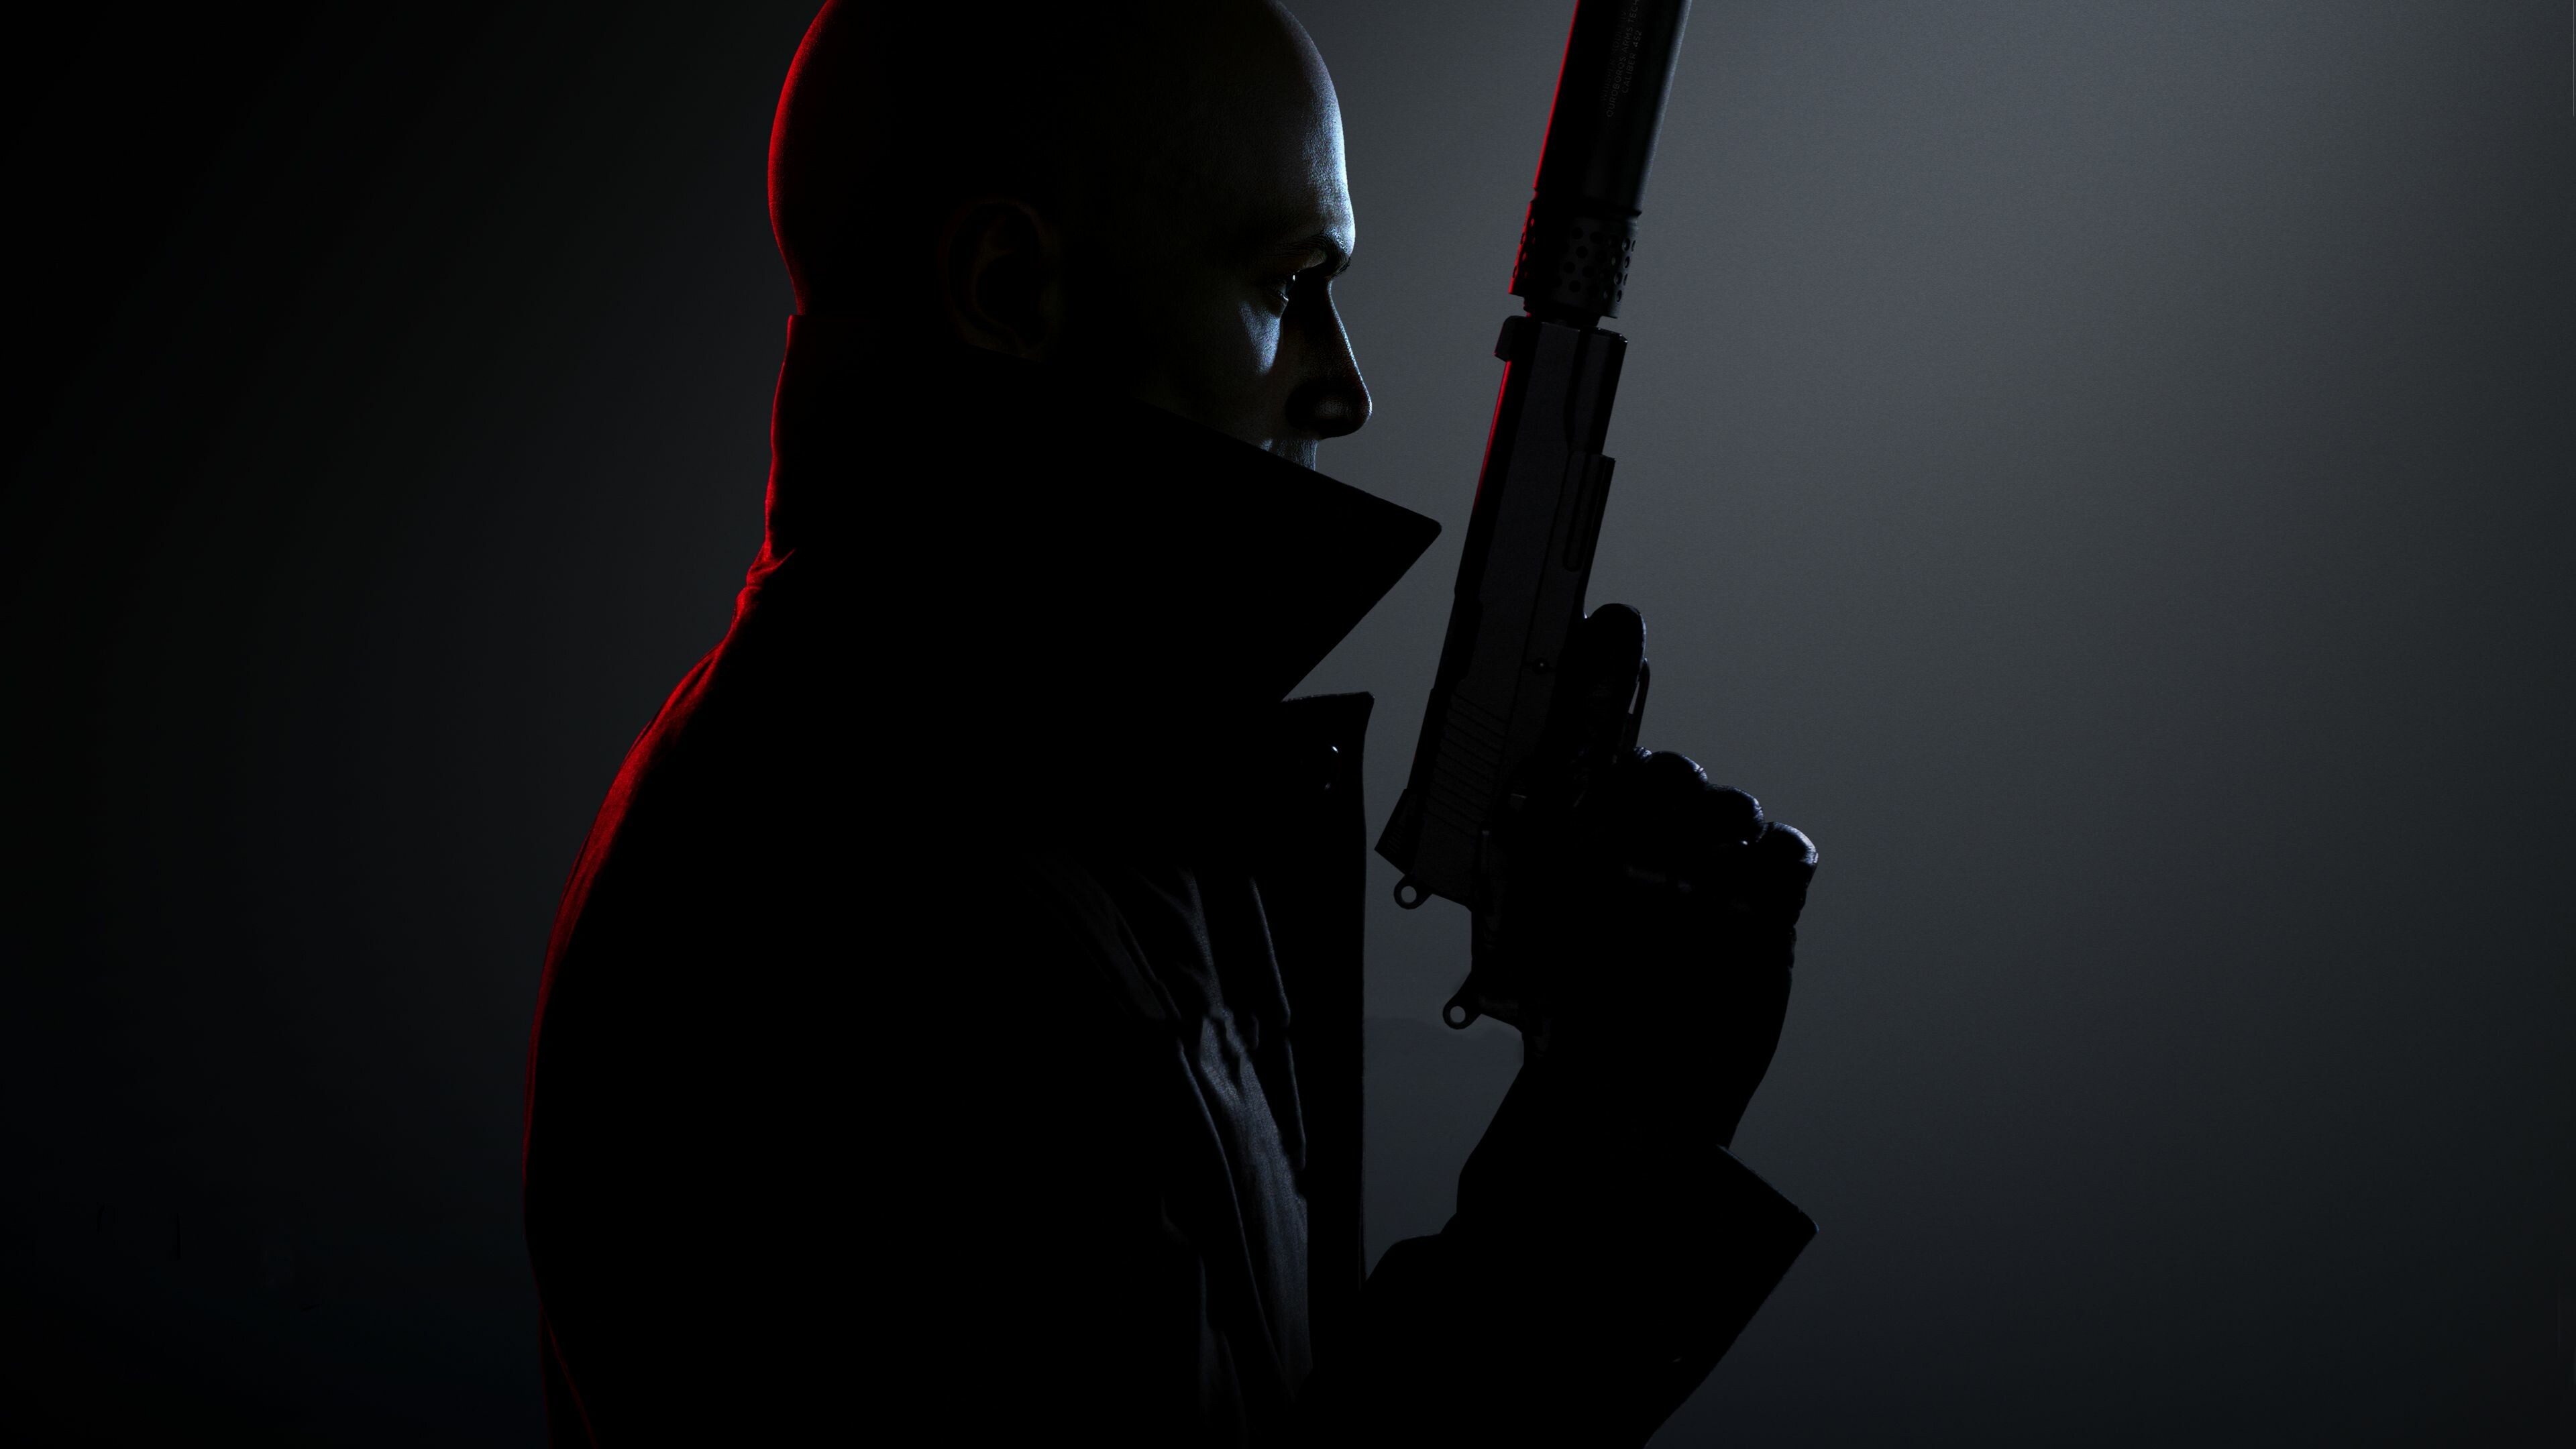 Hitman 2021 wallpapers, Agent 47's latest adventure, Stealthy gameplay, Thrilling missions, 3840x2160 4K Desktop